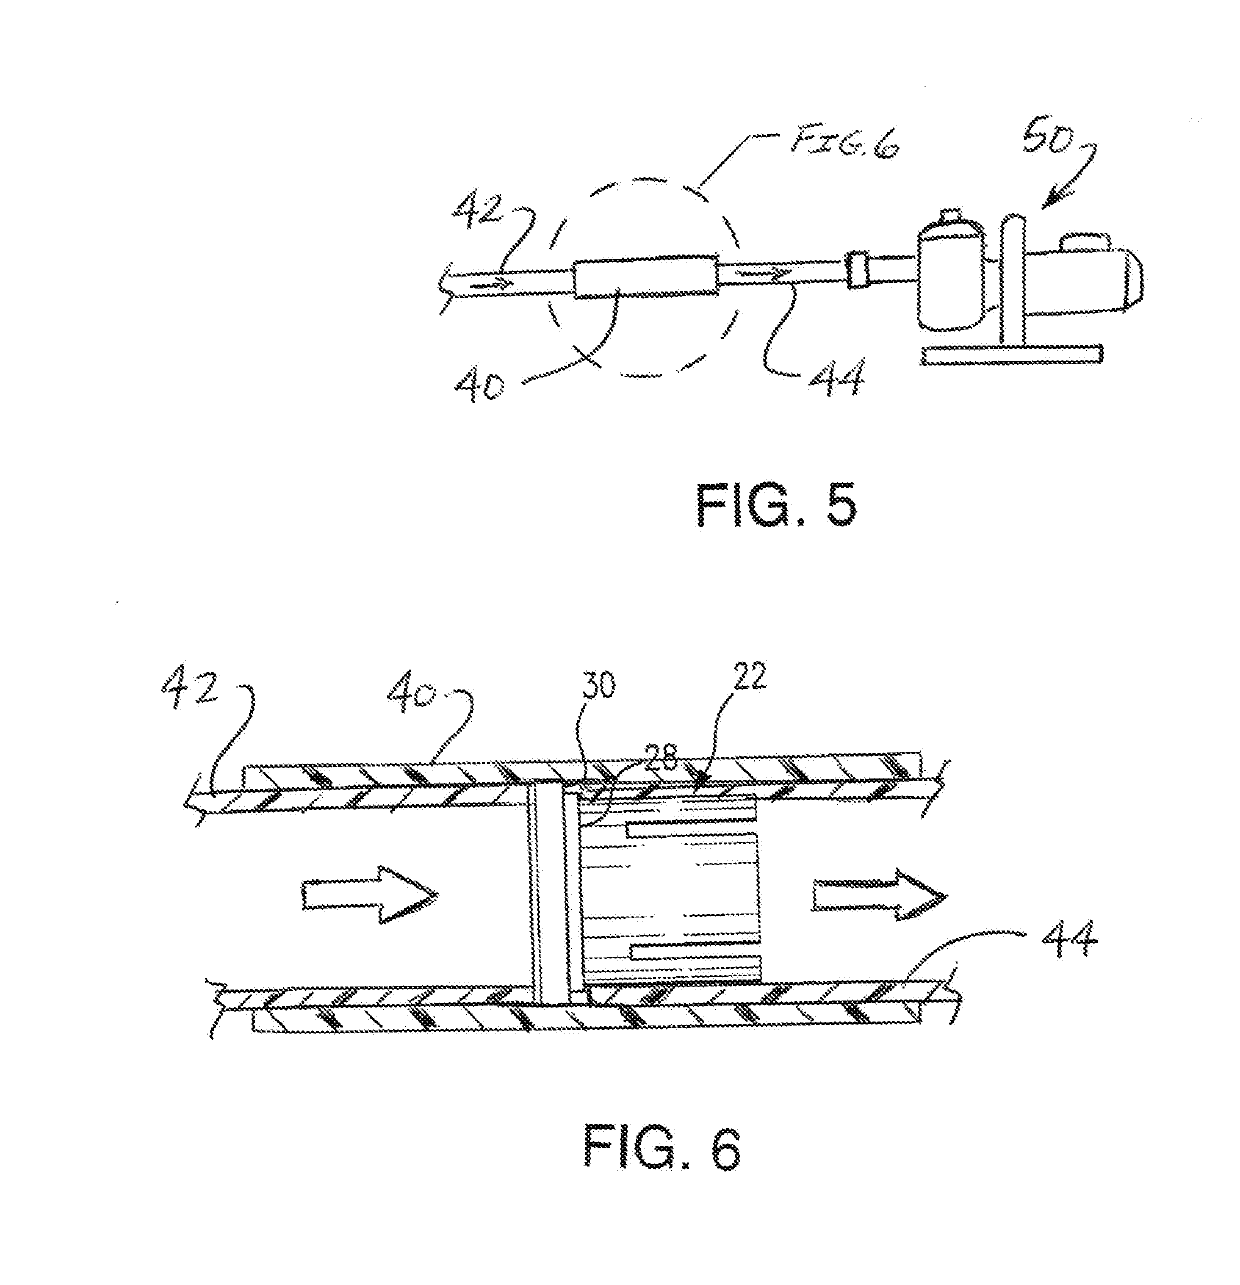 Safety and fluid flow enhancement device for fluid transfer systems